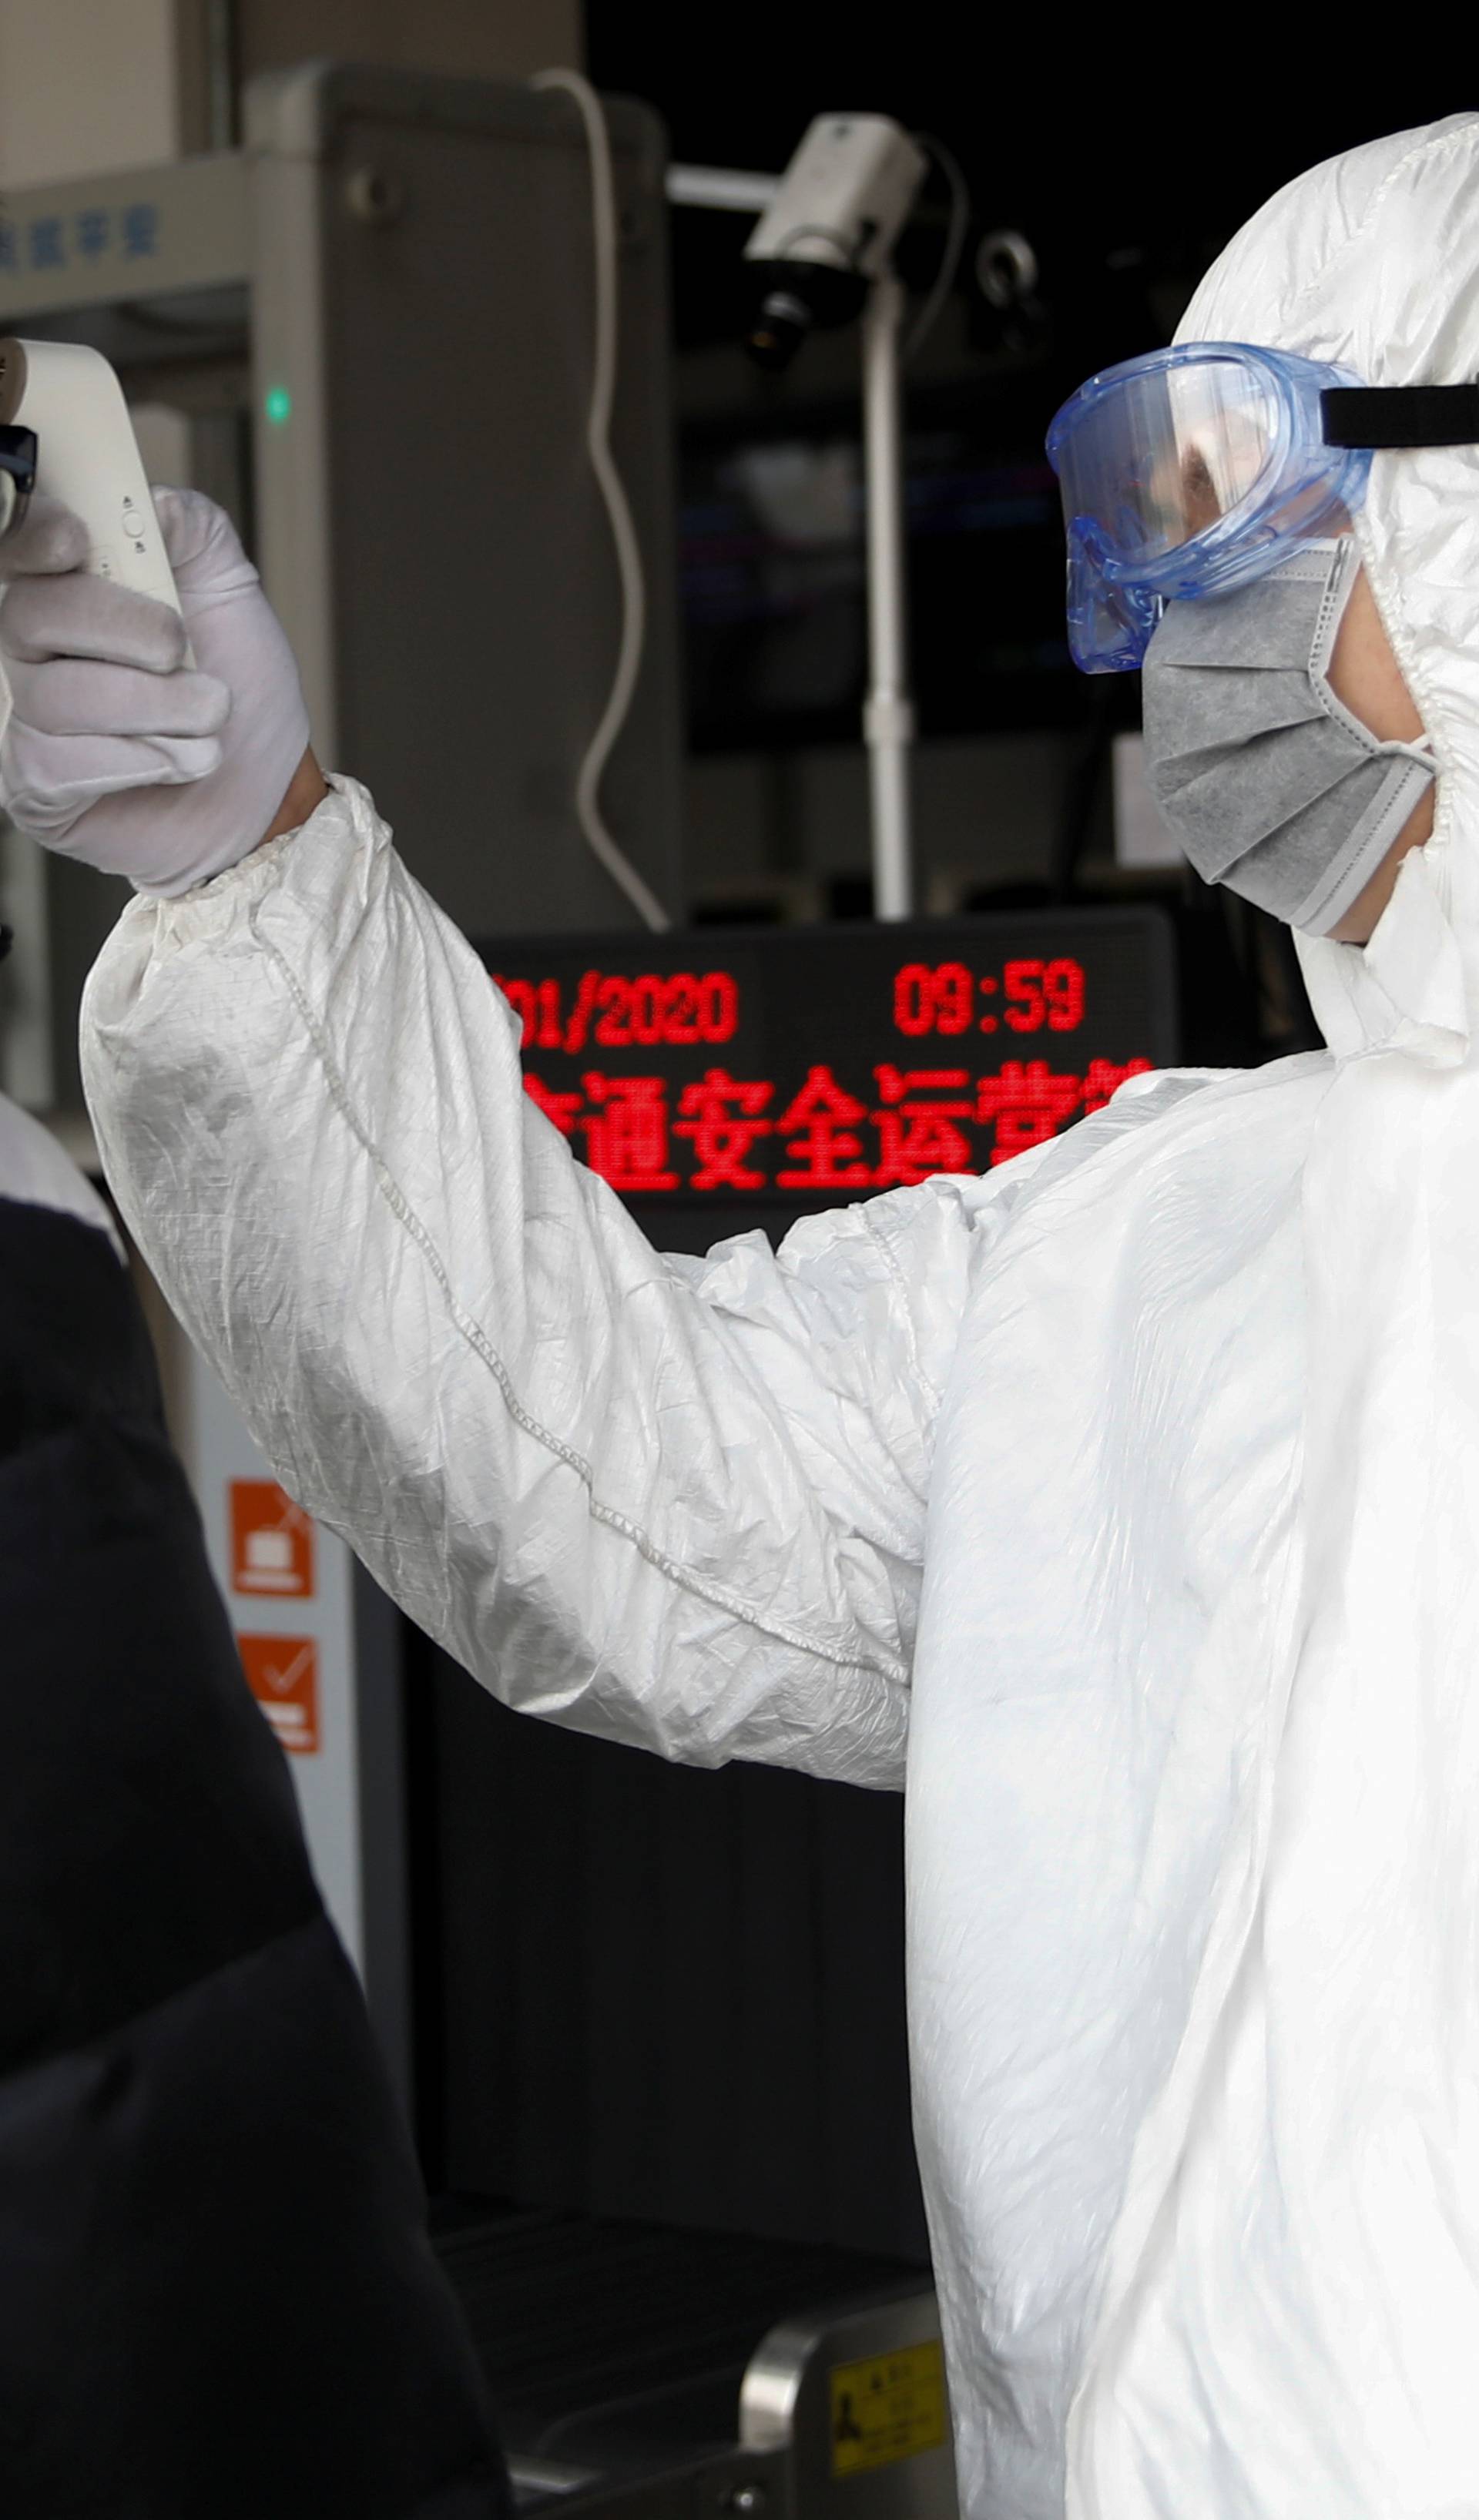 A worker in protective suit uses a thermometer to check the temperature of a man while he enters the Xizhimen subway station, as the country is hit by an outbreak of the new coronavirus, in Beijing